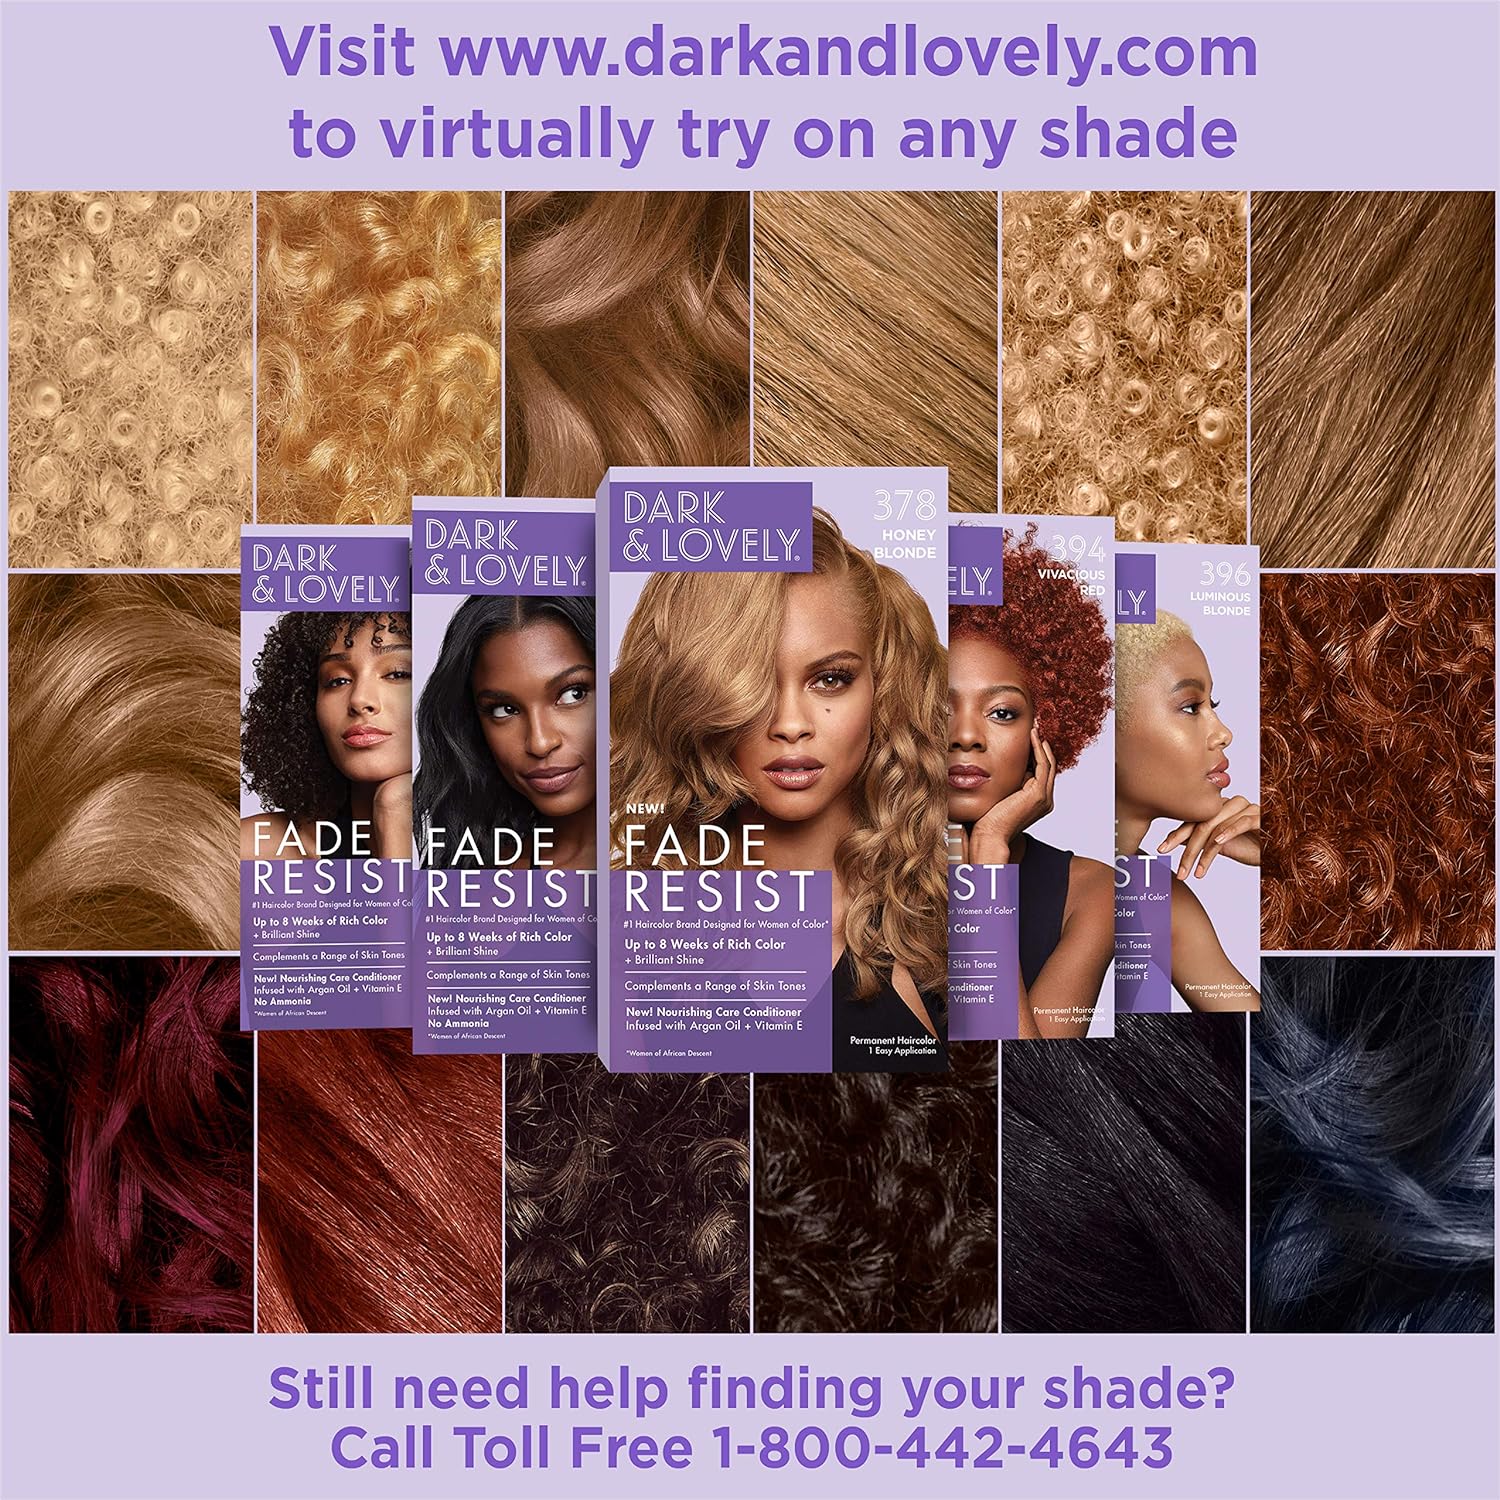 SoftSheen-Carson Dark and Lovely Fade Resist Rich Conditioning Hair Color, Permanent Hair Color, Up To 100 percent Gray Coverage, Brilliant Shine with Argan Oil and Vitamin E, Berry Burgundy : Beauty & Personal Care